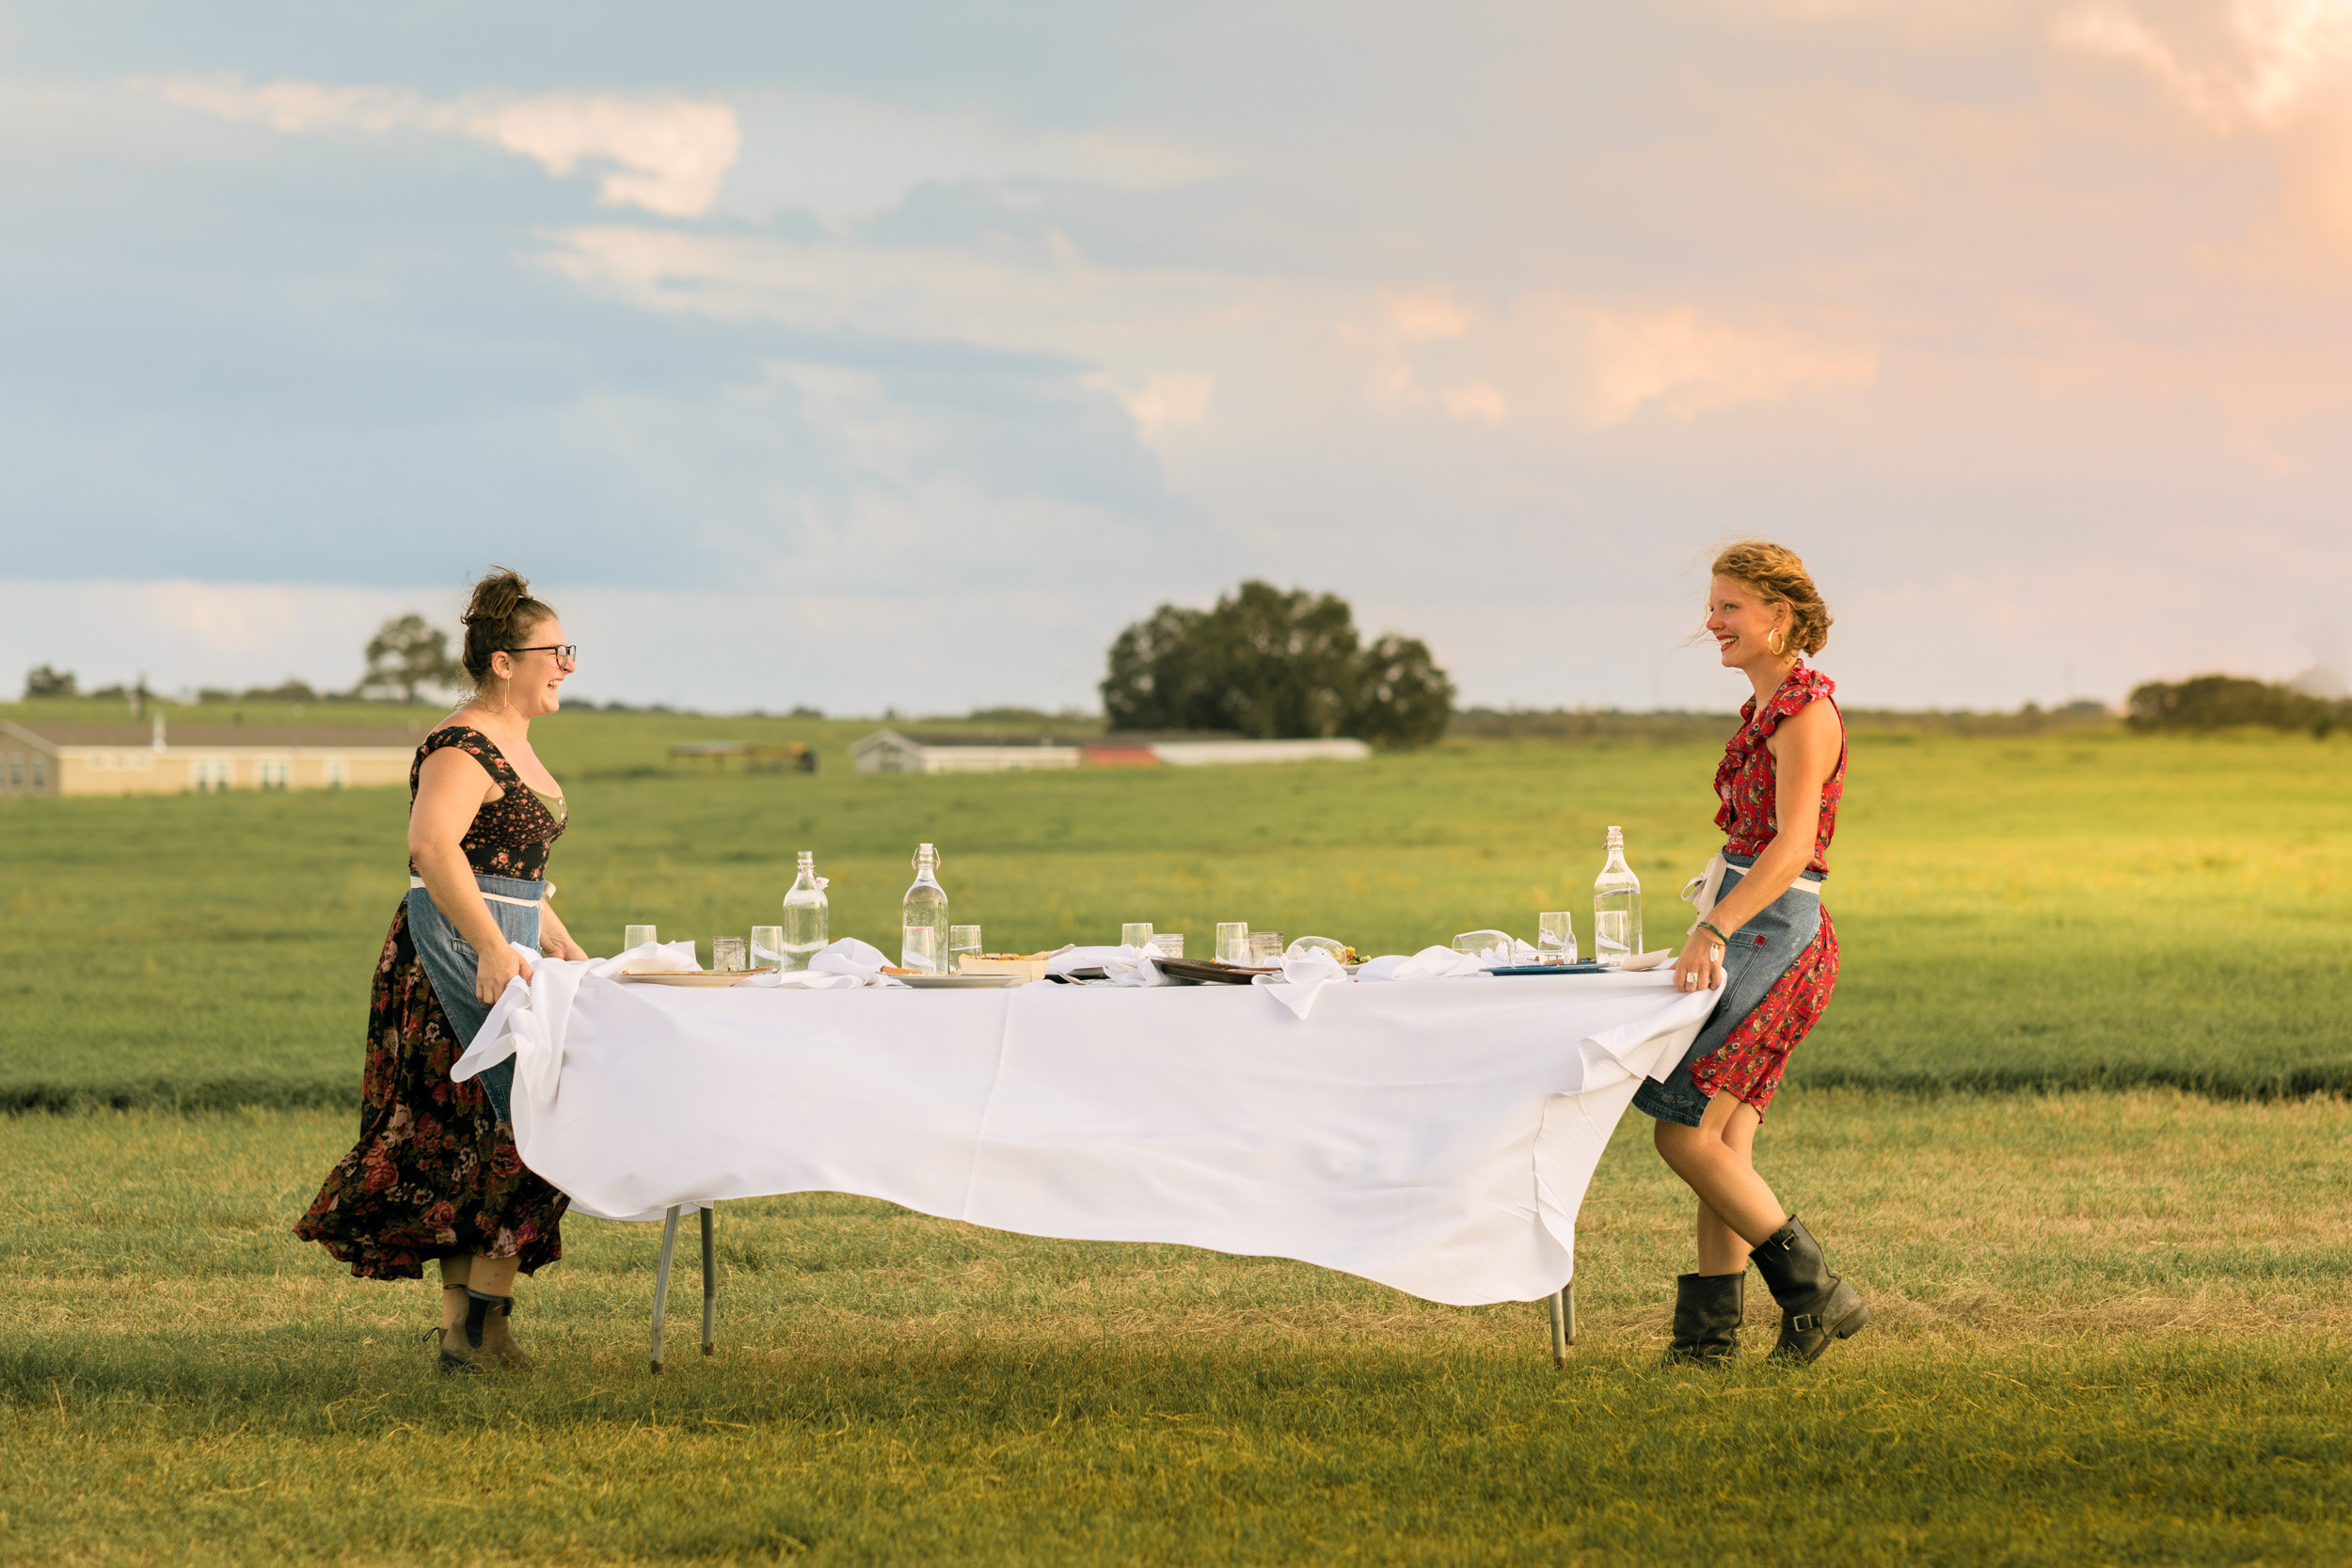 two woman carry table through large grassy field on farm